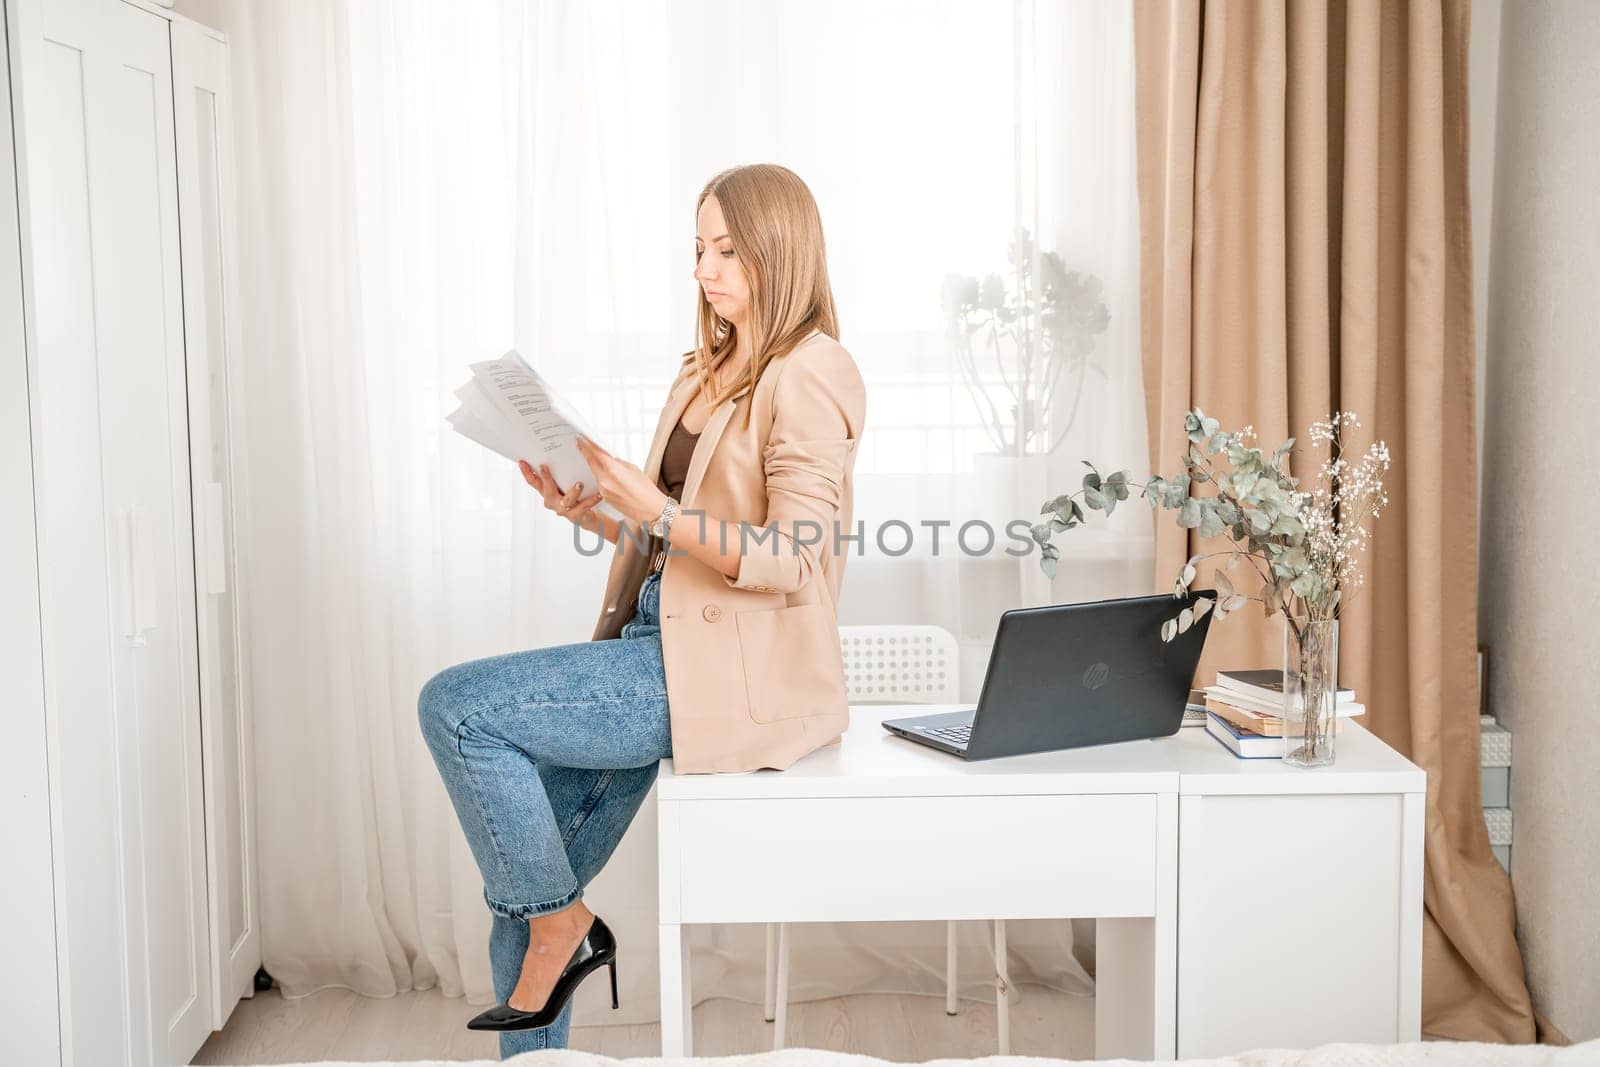 Business woman sitting on desk in home office, positive female lawyer rejoices throwing papers up. She is wearing a beige jacket and jeans